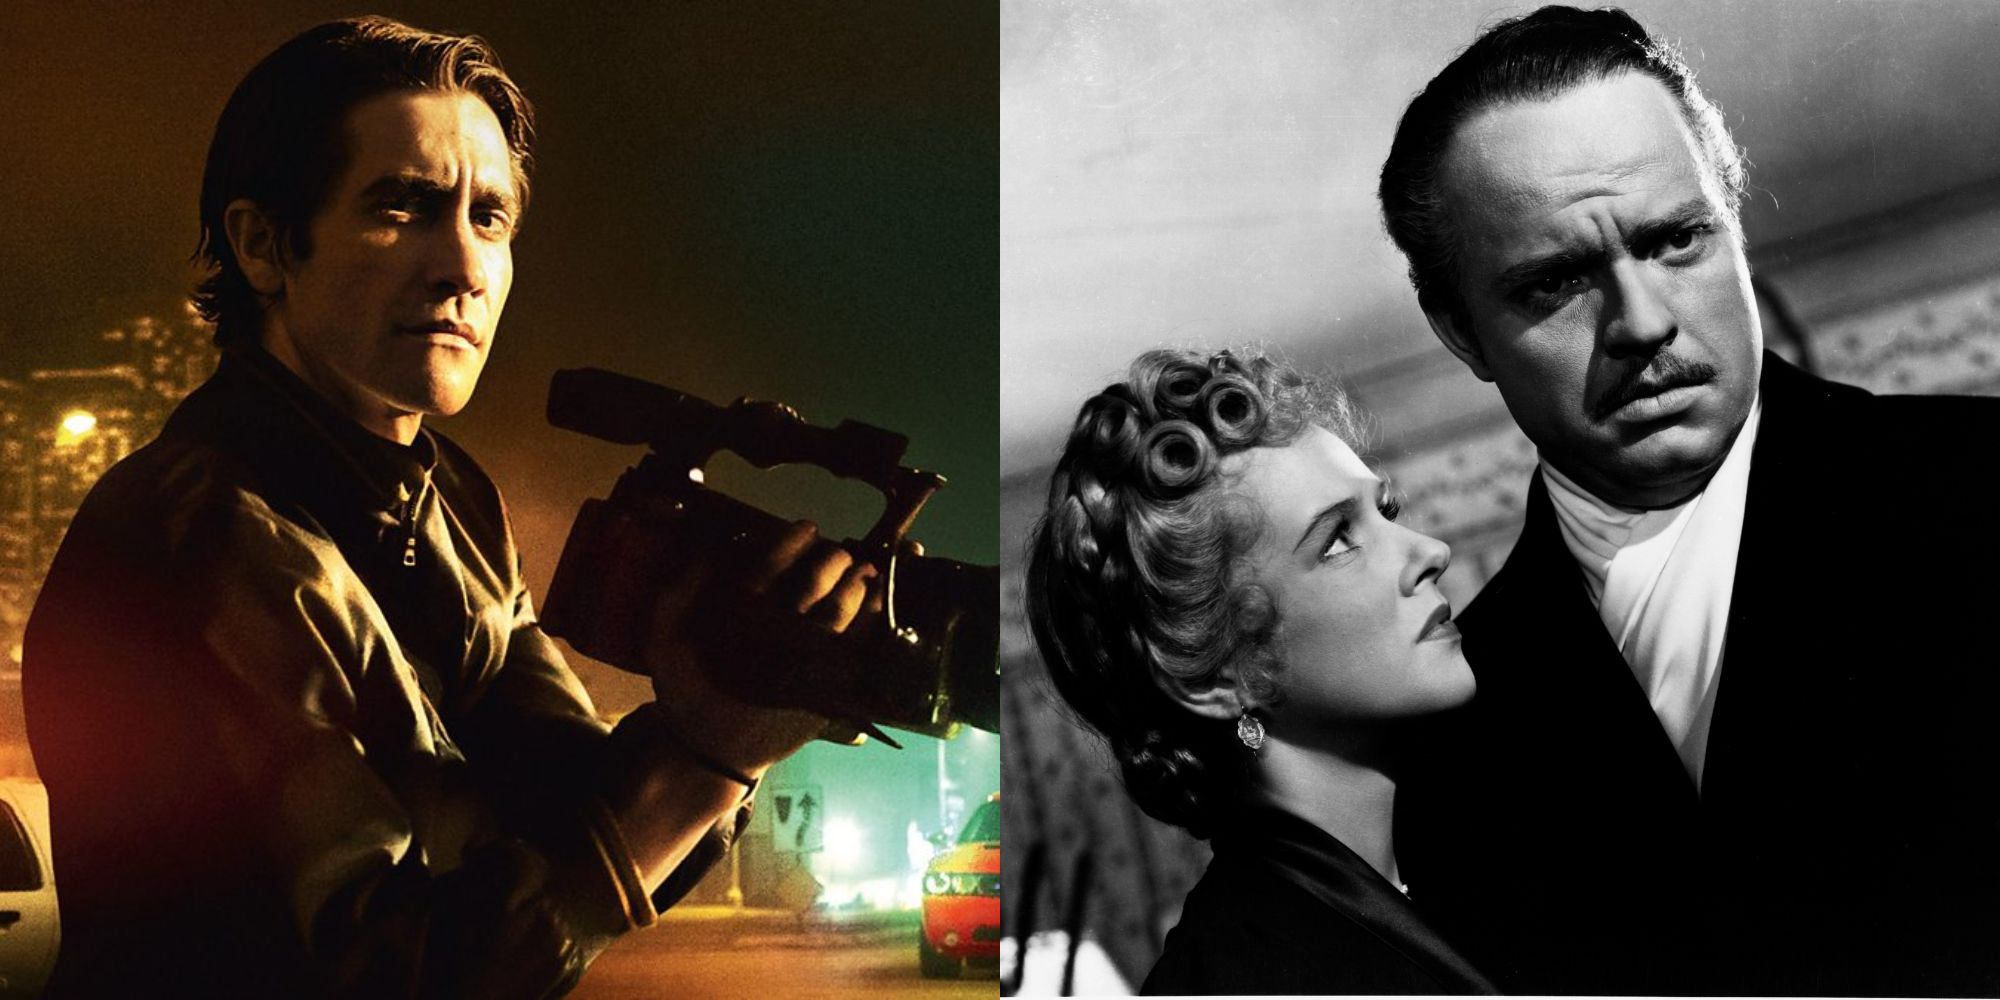 Split image showing characters from the films Nightcrawler and Citizen Kane.